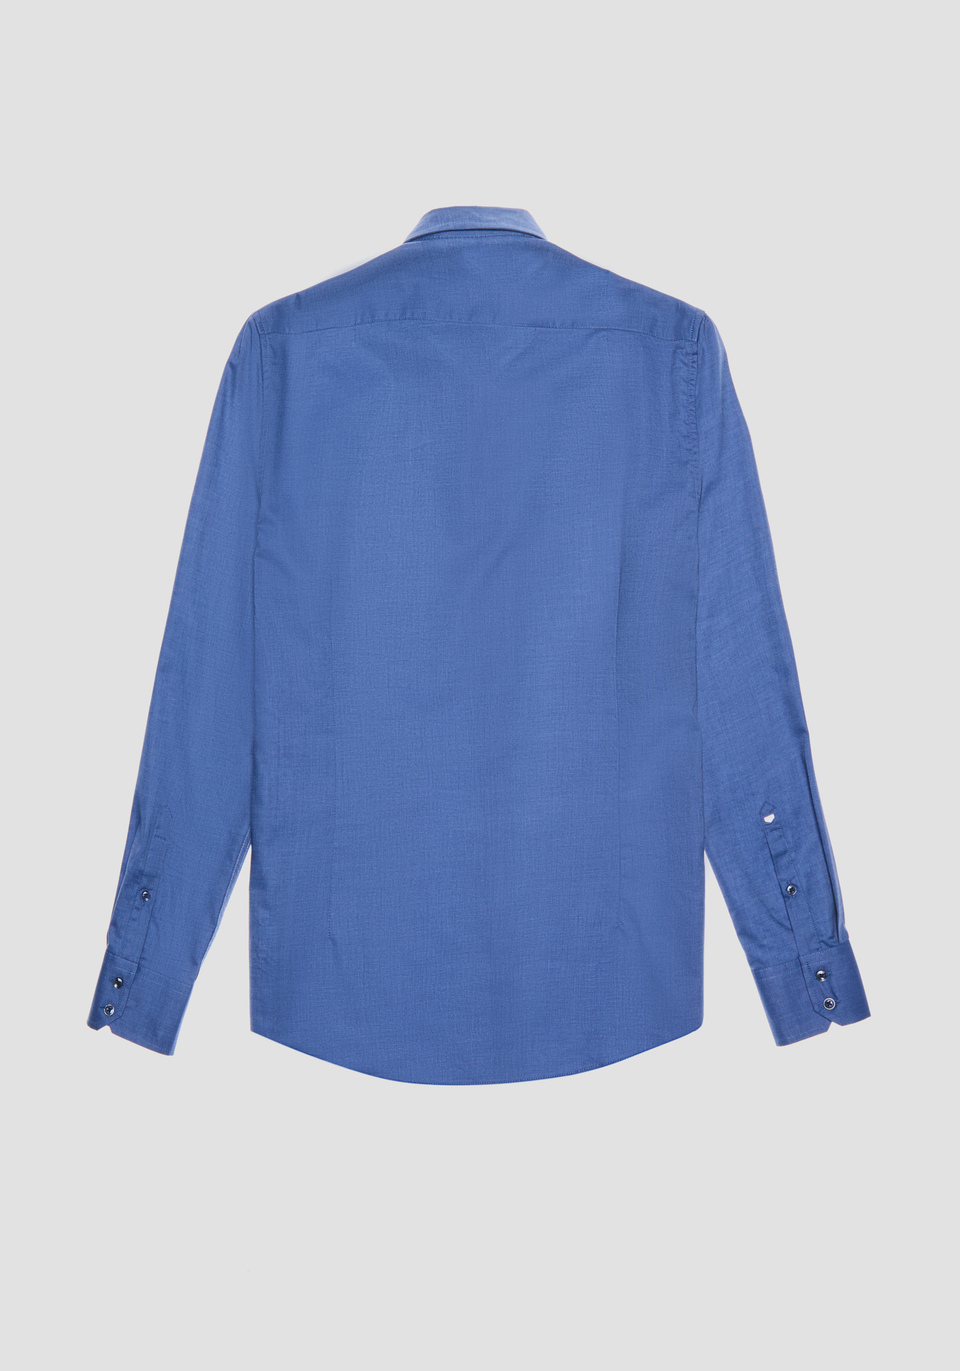 "NAPOLI" SLIM-FIT SHIRT IN EASY-IRON PURE COTTON WITH DENIM EFFECT - Antony Morato Online Shop